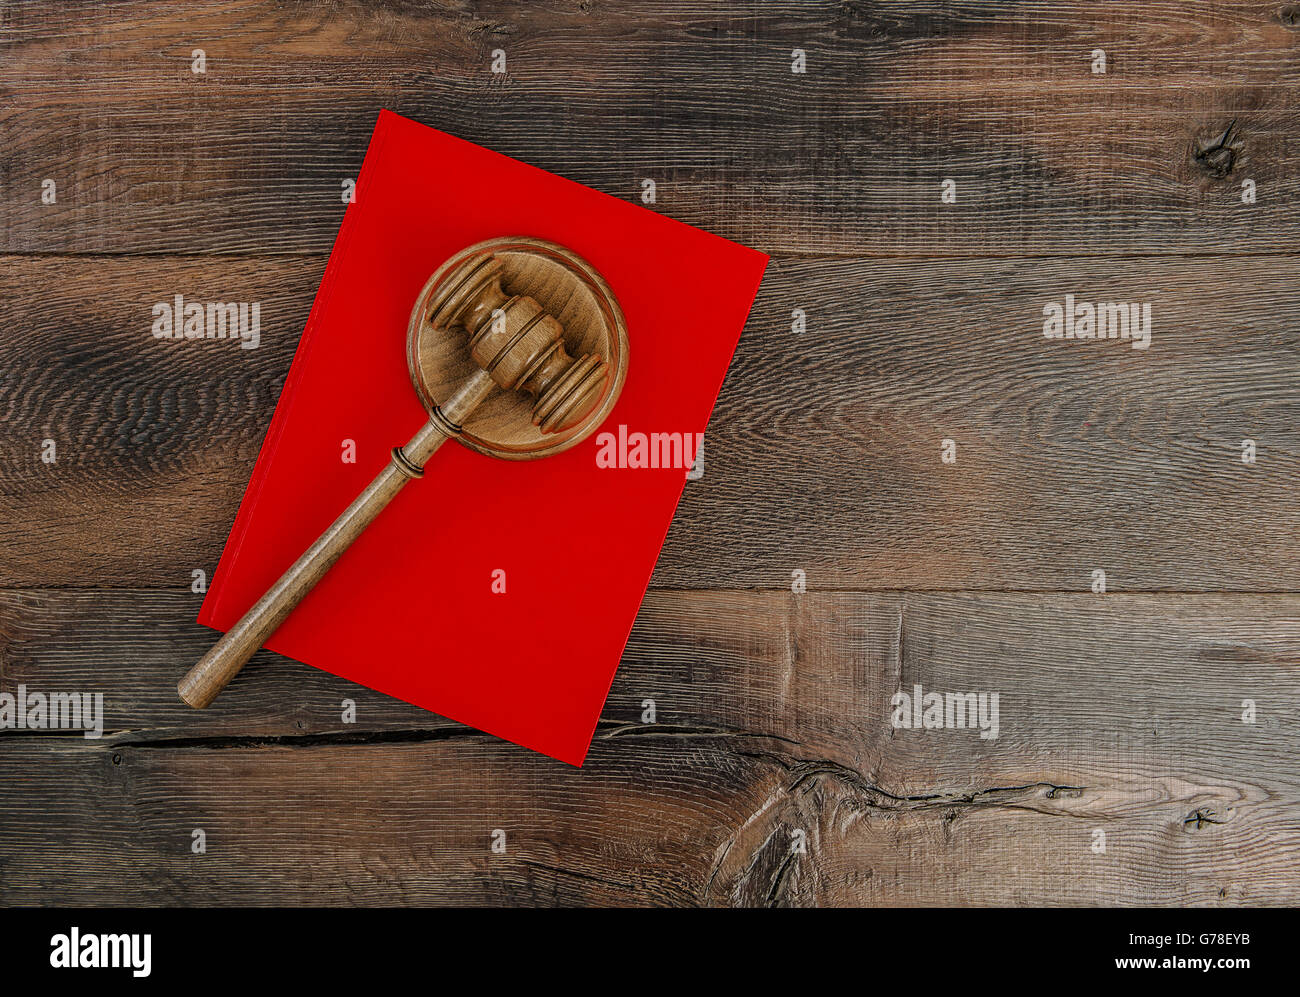 Judges Gavel with Soundboard and red Book. Hammer on rustic wooden background Stock Photo